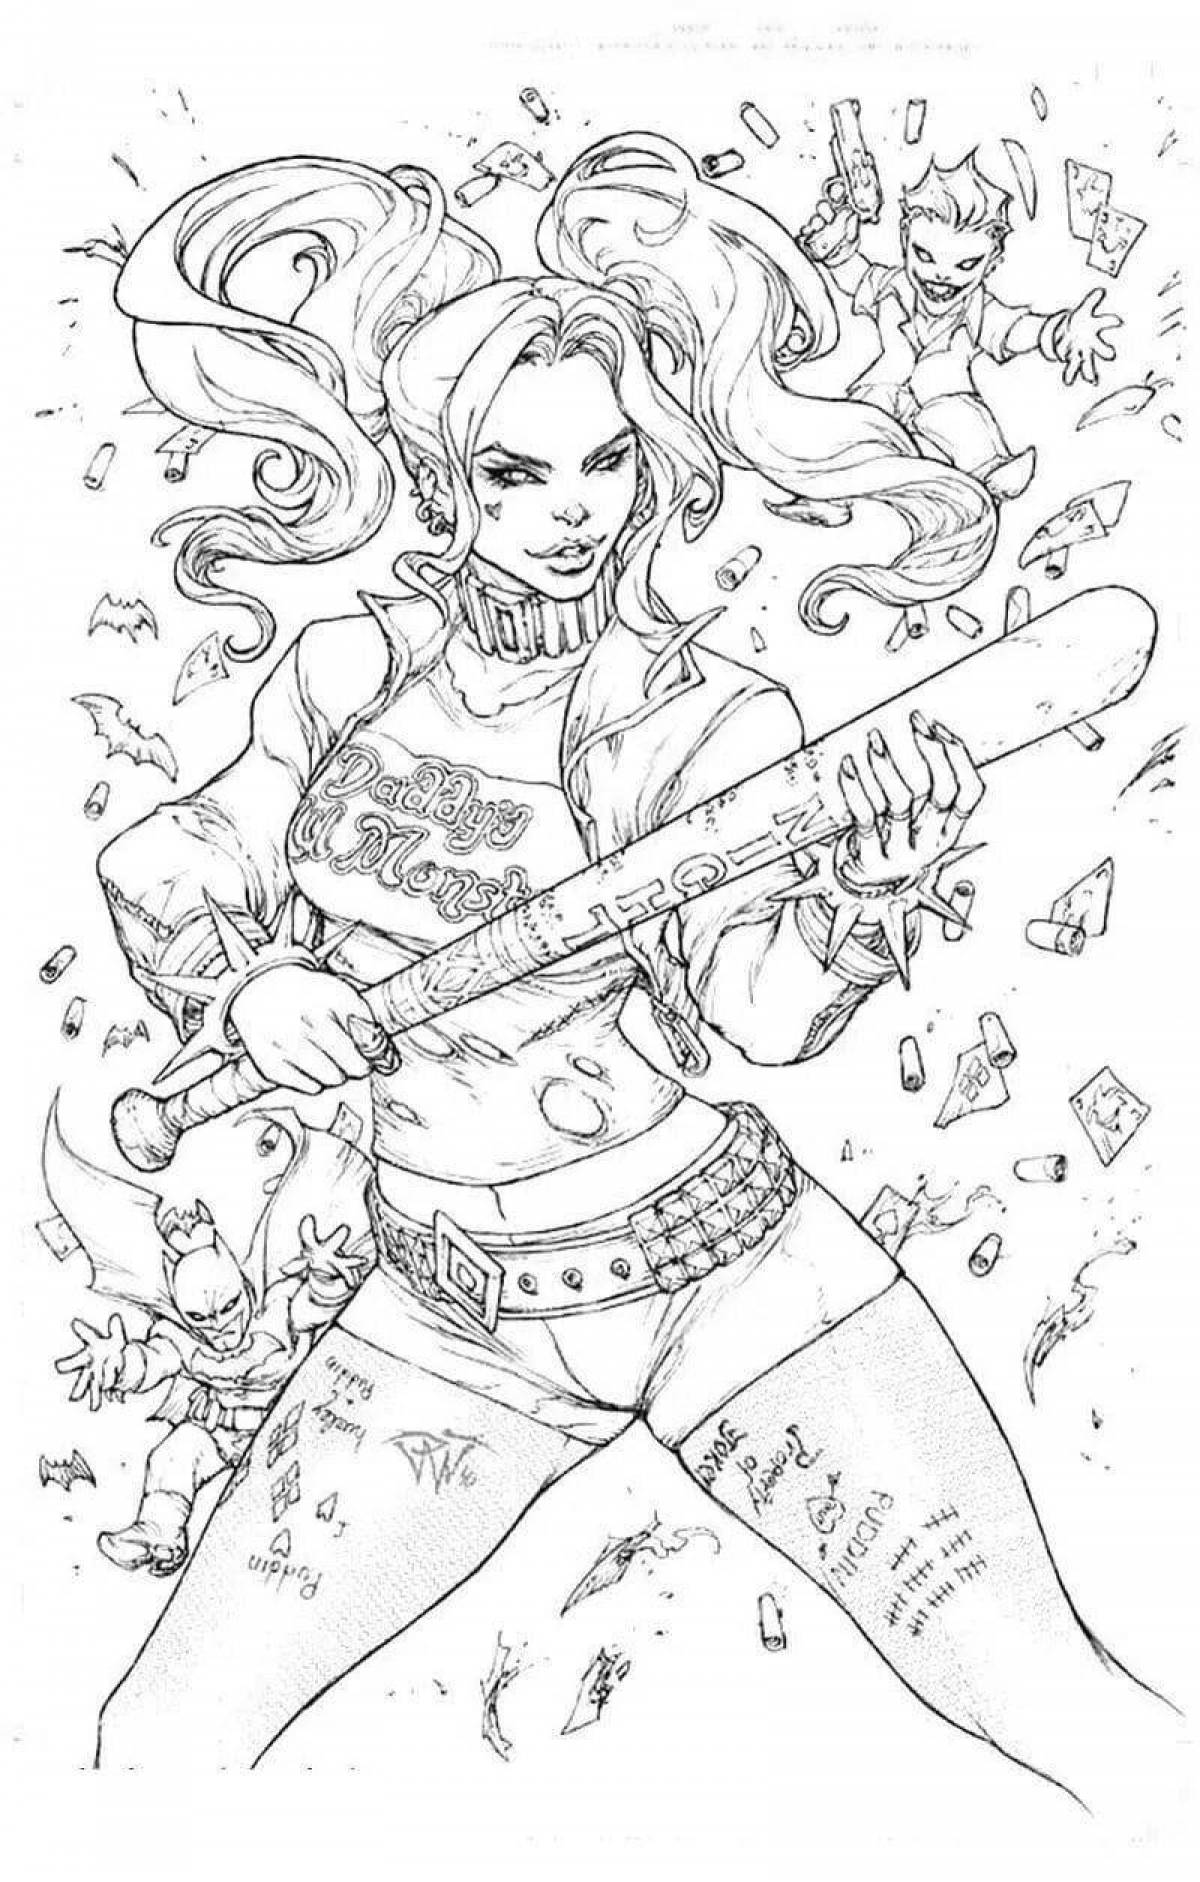 Playful harley quinn coloring book for girls